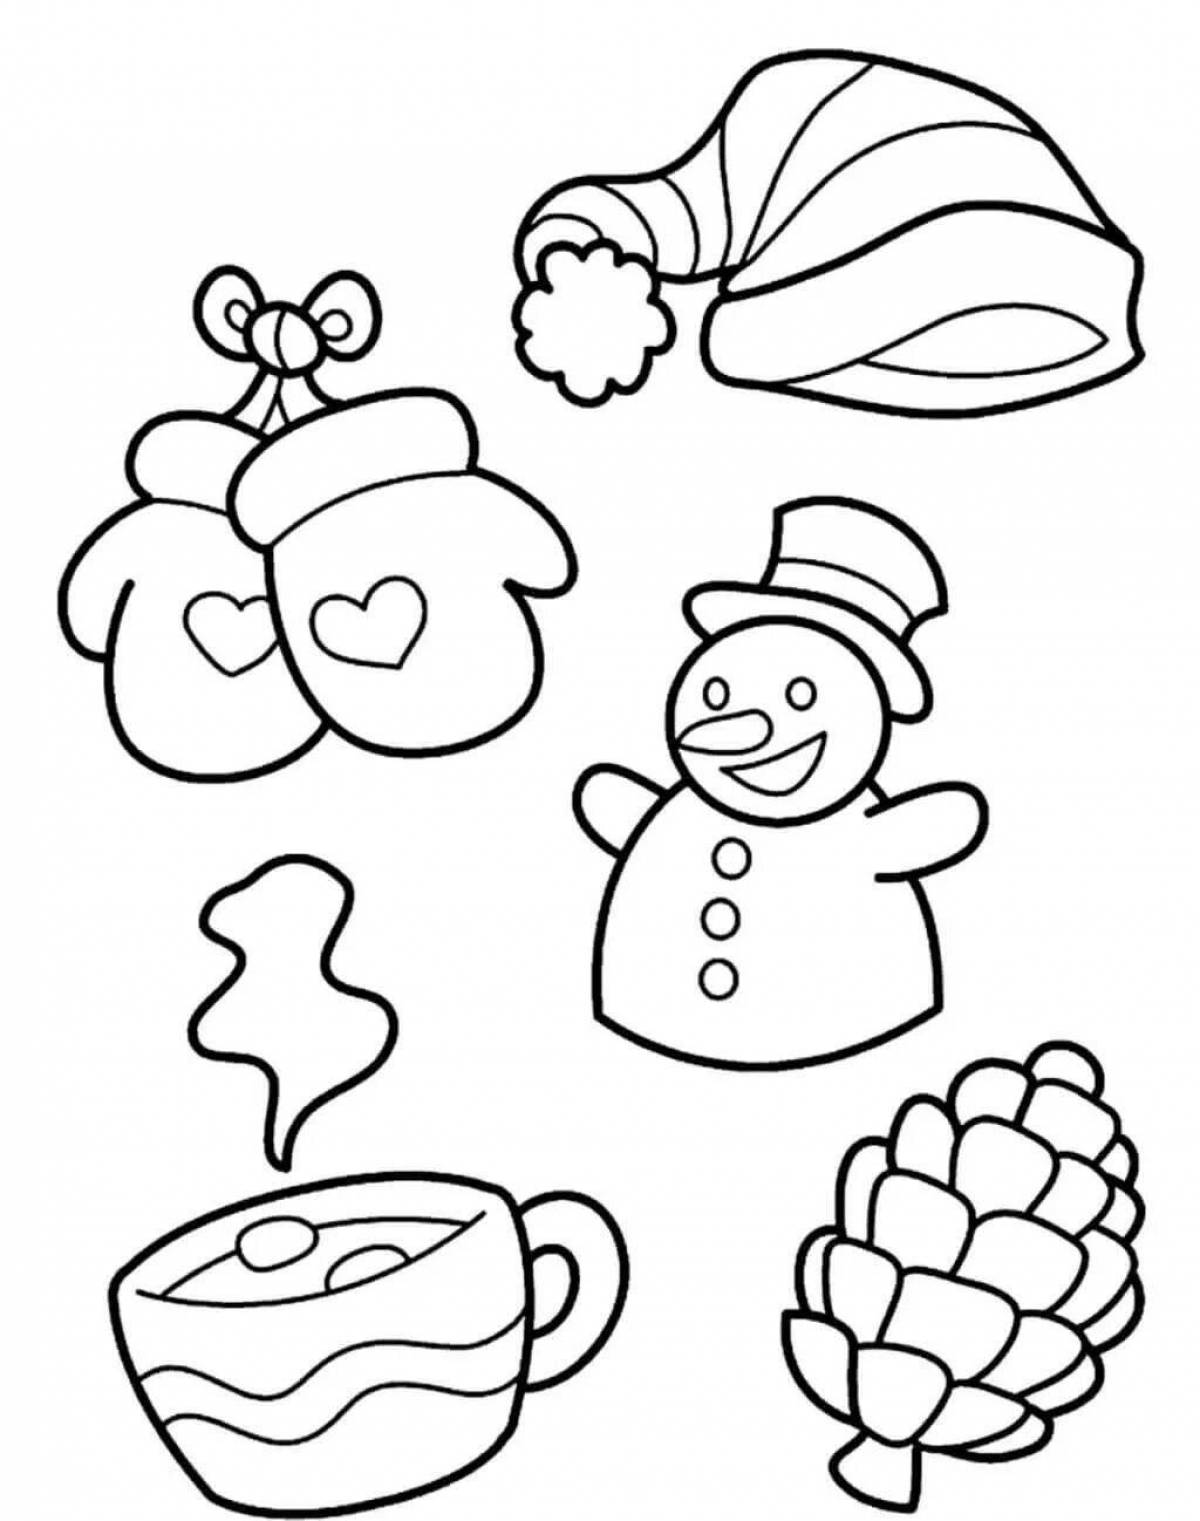 Magic winter coloring for kids 2 3